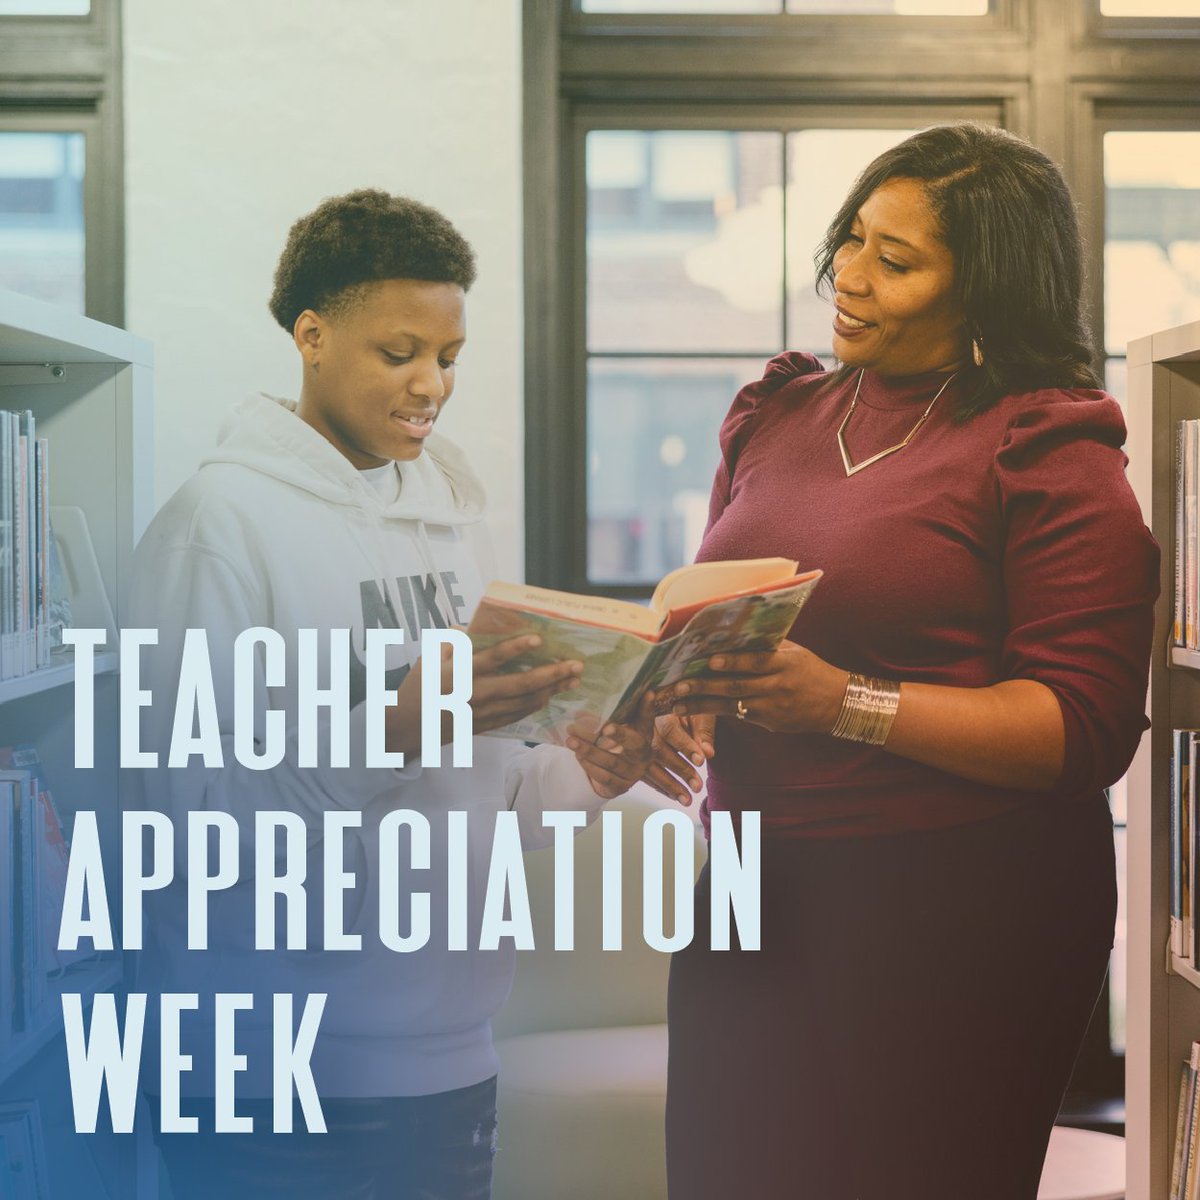 Sending a huge THANK YOU to the teachers that invest in the future of our nation’s young people this #TeacherAppreciationWeek!🤗 Learn how you can support teachers in creating relationship-centered schools at 🔗bit.ly/44s3LUN #ThankATeacher #MentoringAmplifies